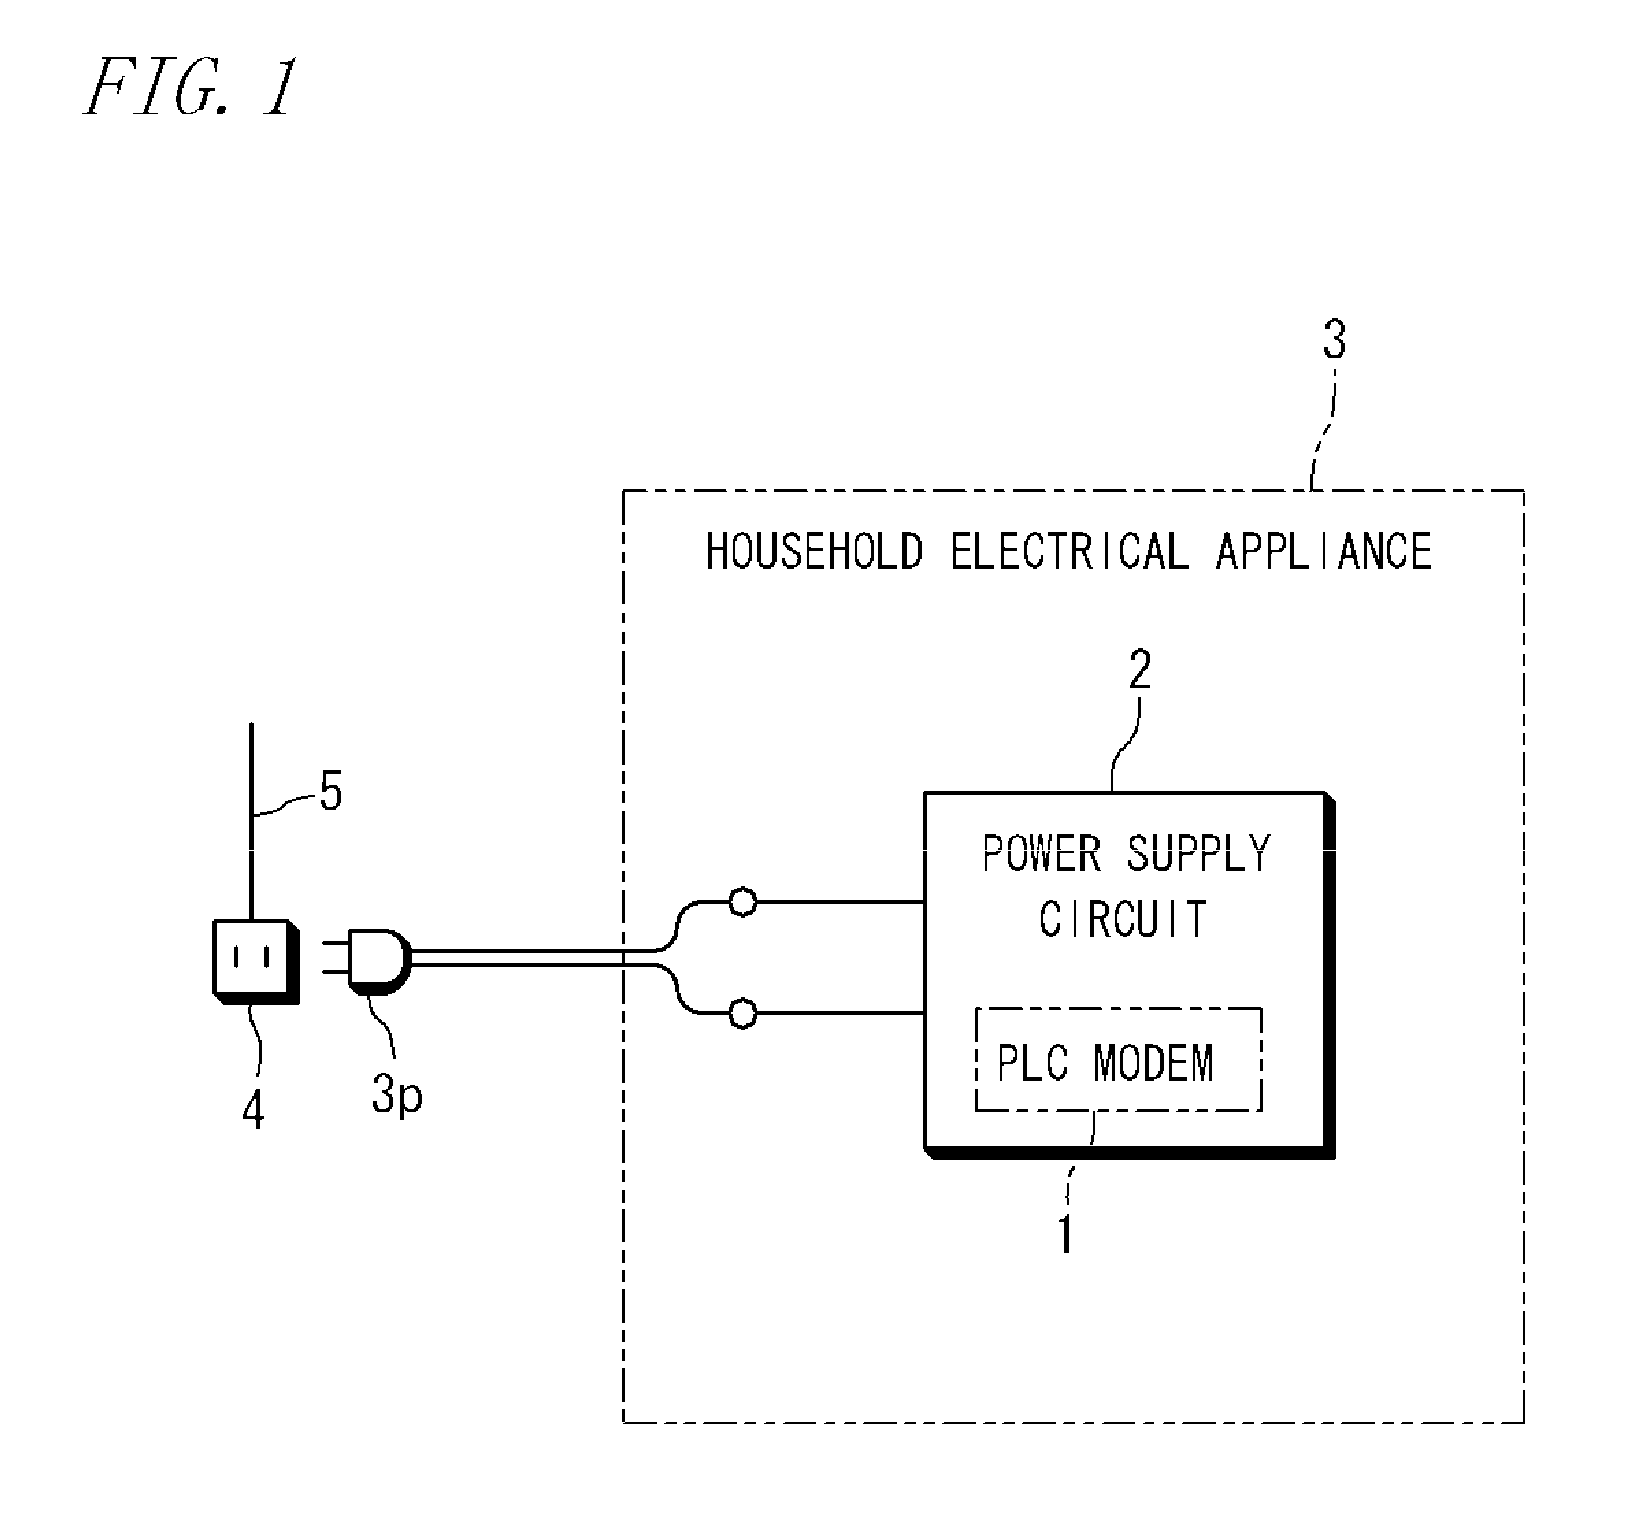 Power line communication device, power supply circuit with communication function, electric appliance, and control and monitoring system